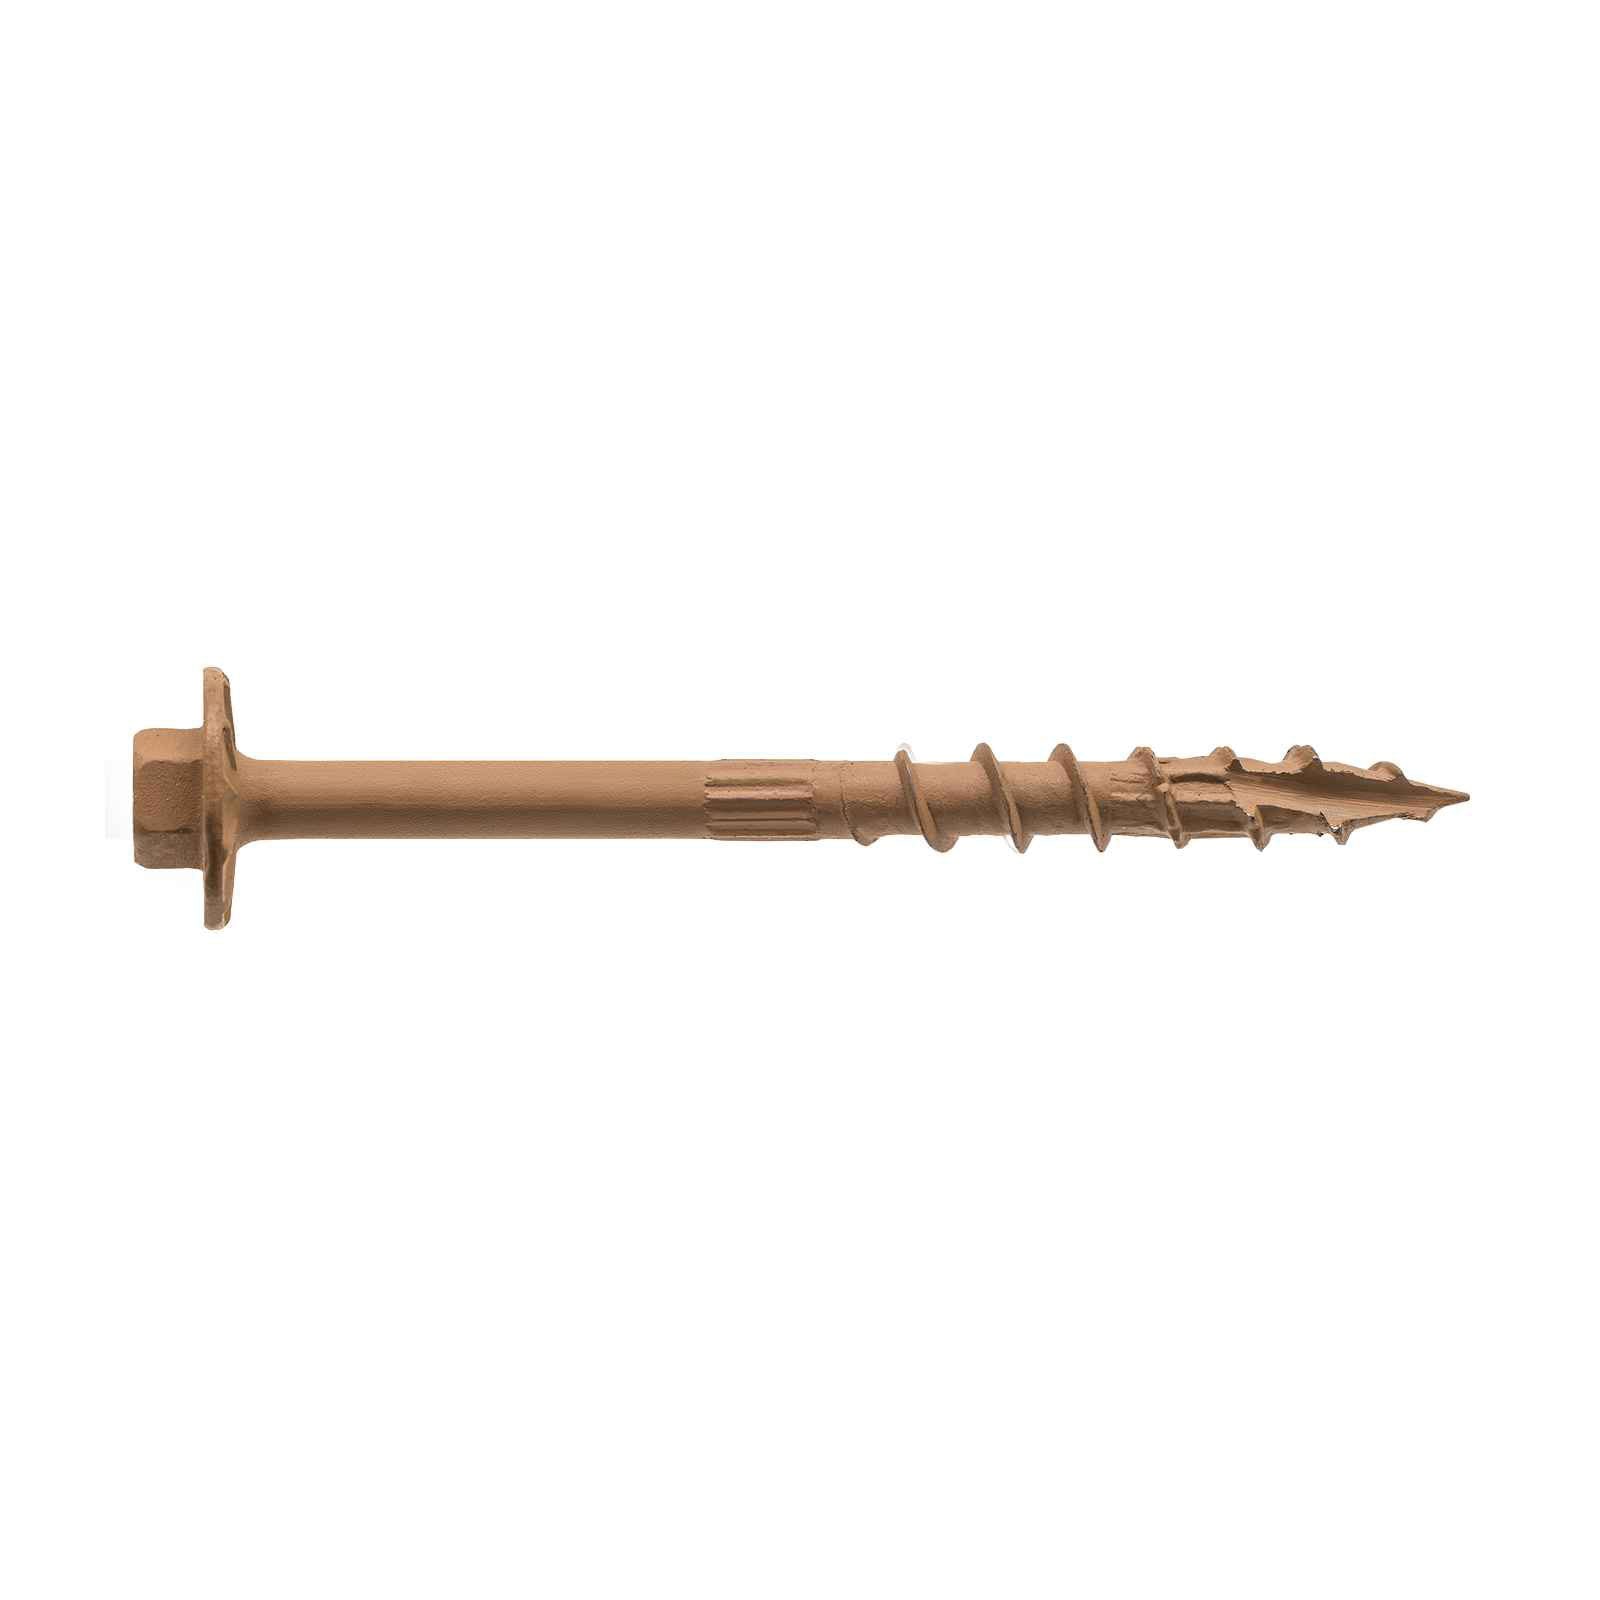 0.195" x 3" Strong-Tie SDWH19300DB-R50 Timber Hex Screw - Double Barrier Coating